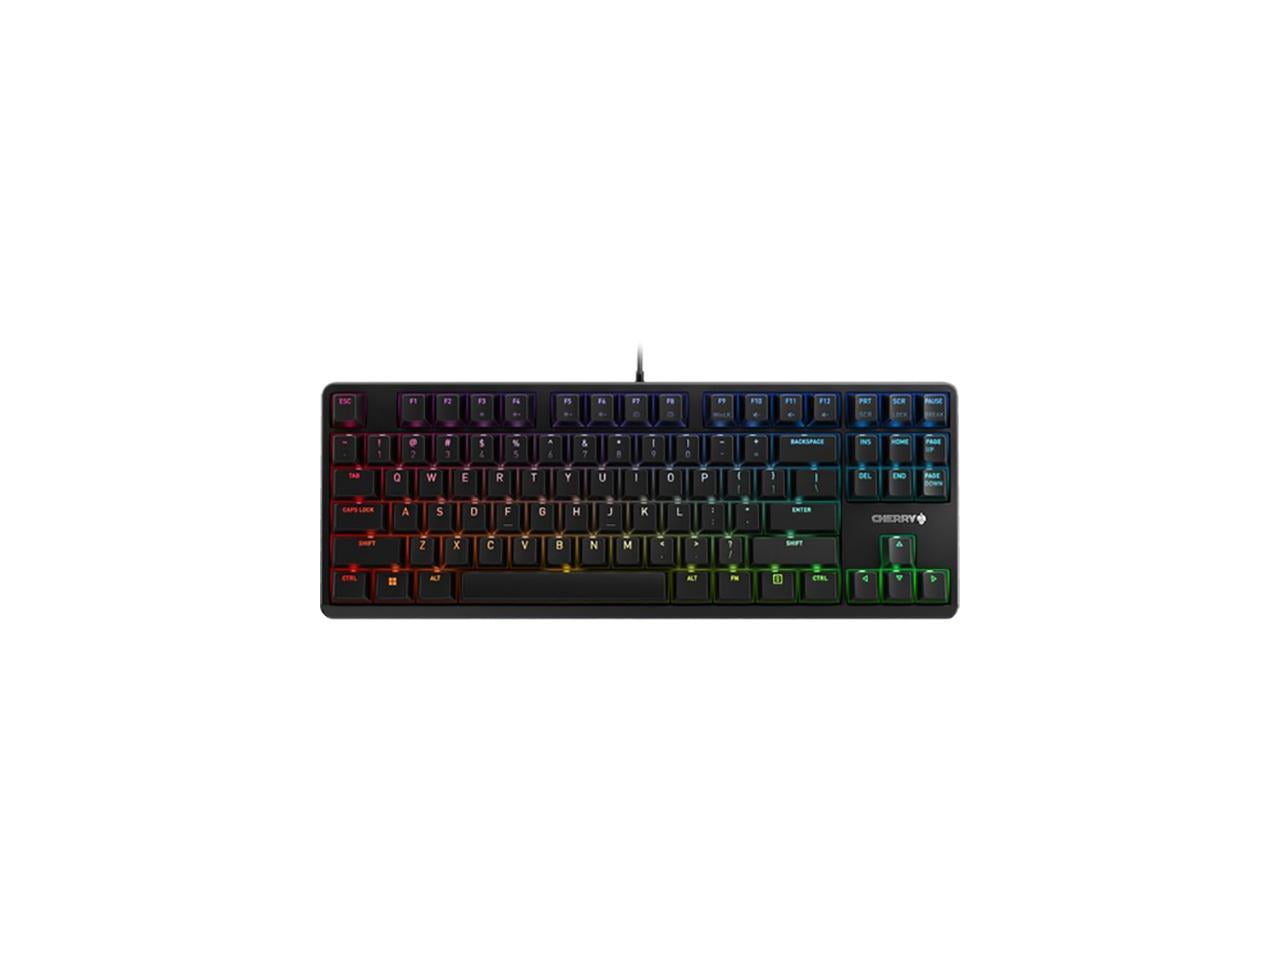 Mose Drivkraft robot Cherry MX RGB Mechanical Keyboard with MX Red Silent Gold-Crosspoint Key  switches for typists, Programmers, Creator, Coder, Work in The Office or at  Home G80-3000N RGB (TenKeyLess (TKL) - Walmart.com